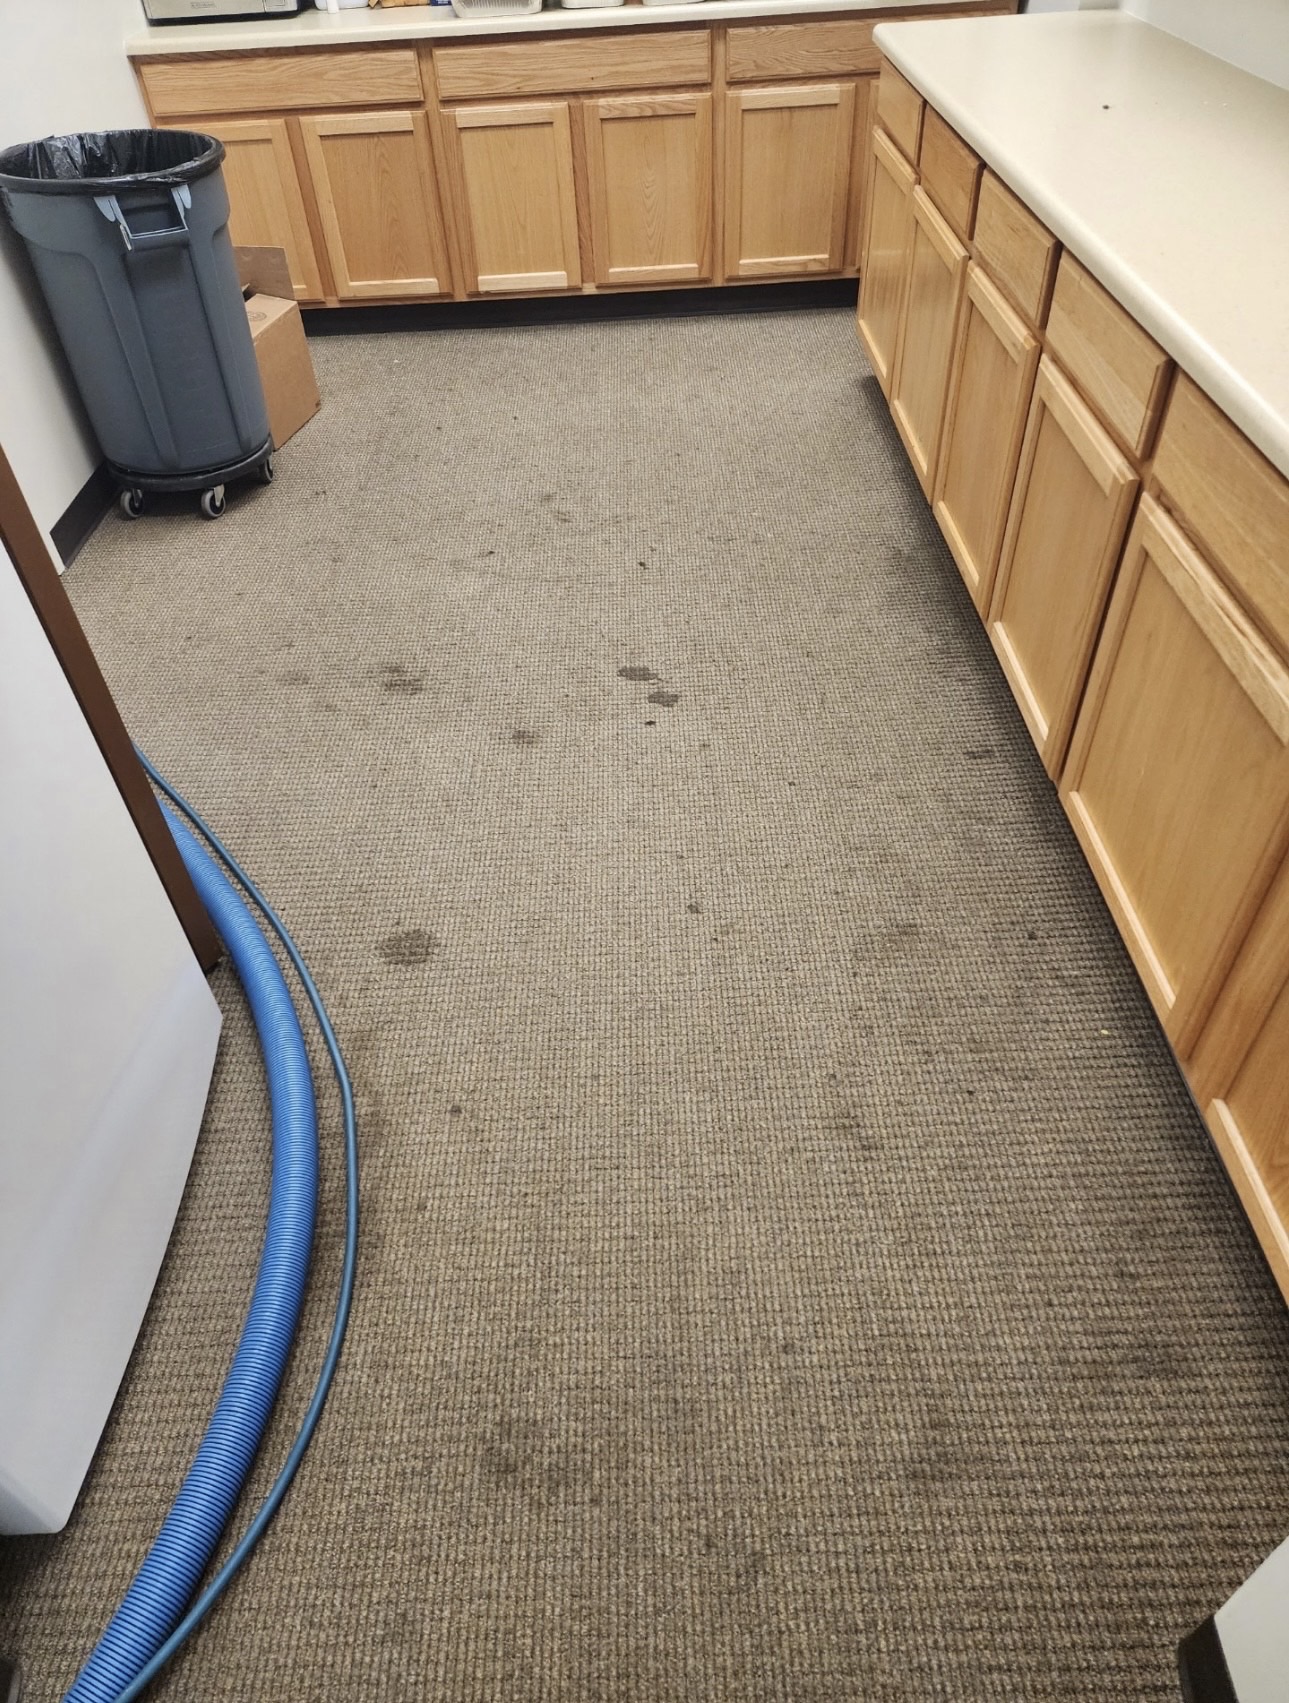 Mountain Best Carpet & Upholstery Cleaning 6137 High Dr, Morrison Colorado 80465